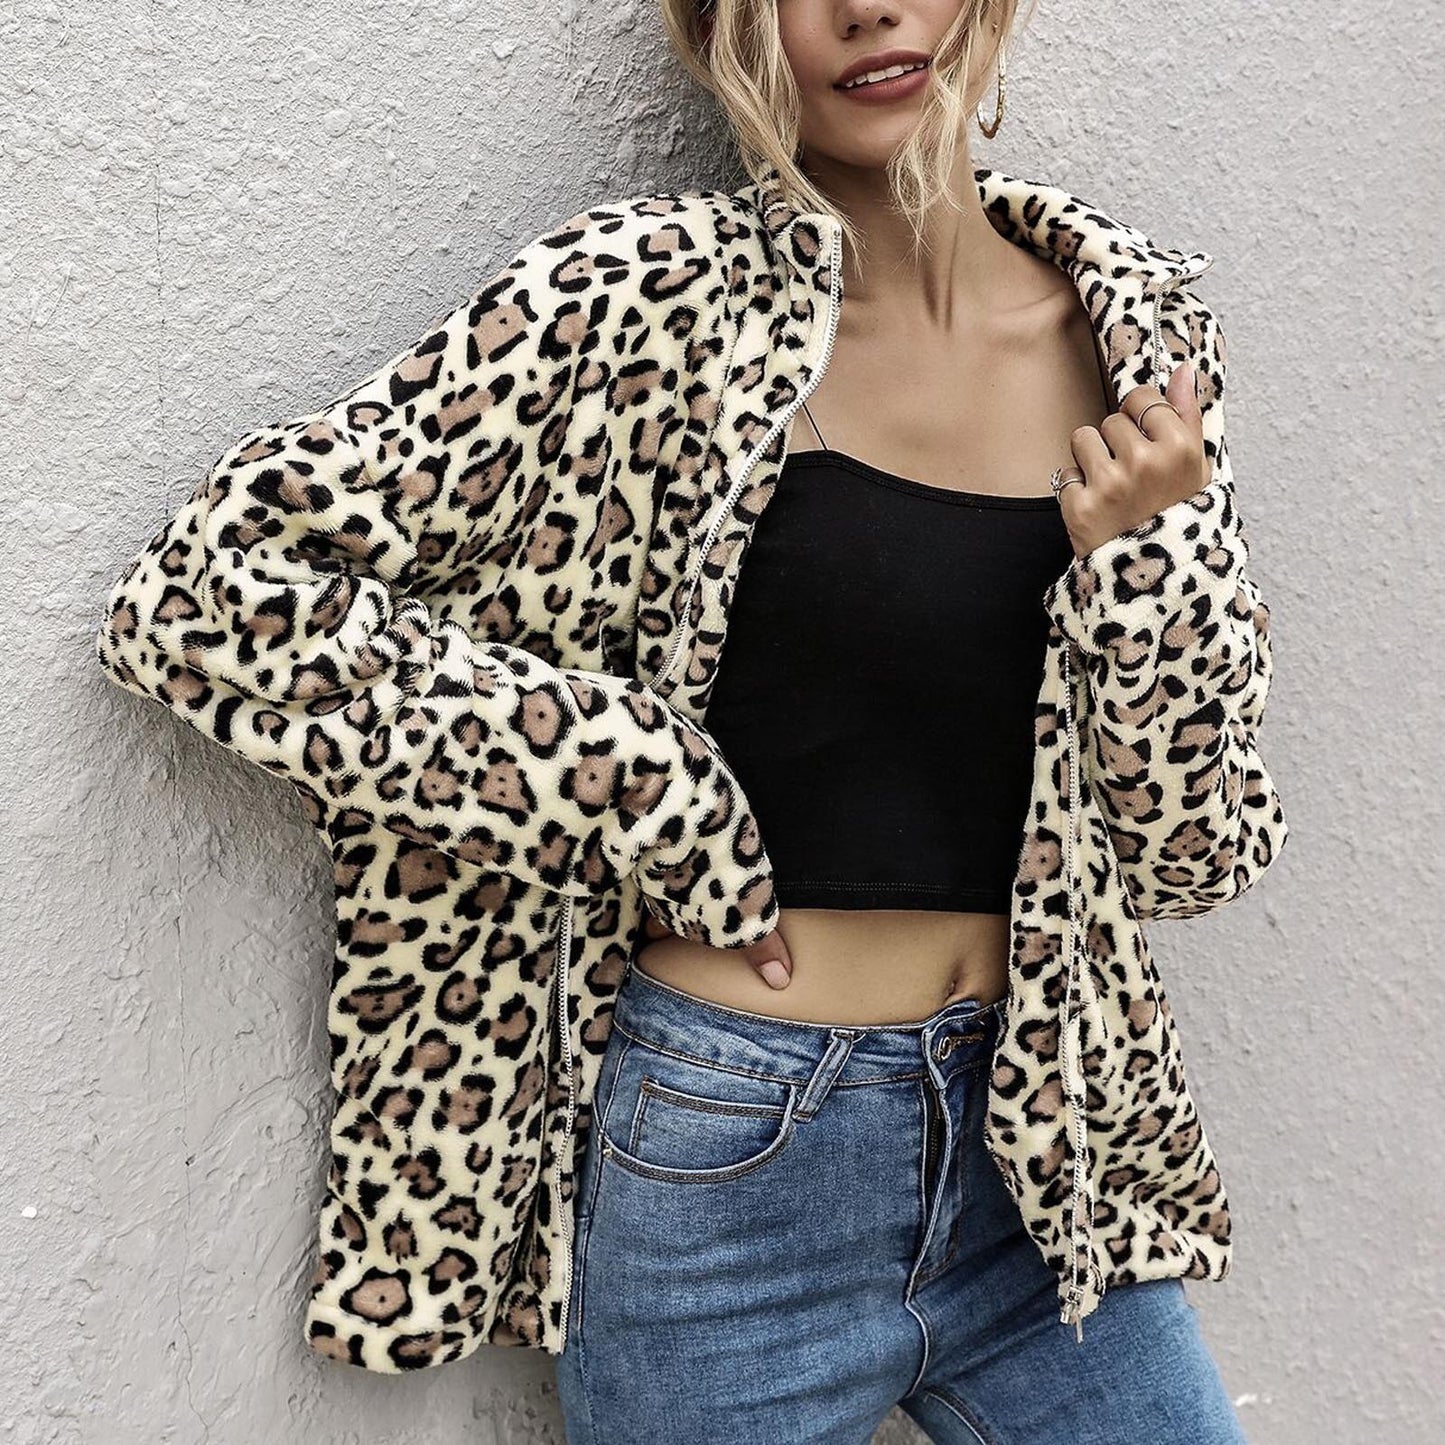 Fashion Women Ladies Autumn And Winter Thicken Warm Zipper Leopard Printed Lapel Long Sleeve Loose Plush Jacket Outerwear#g3